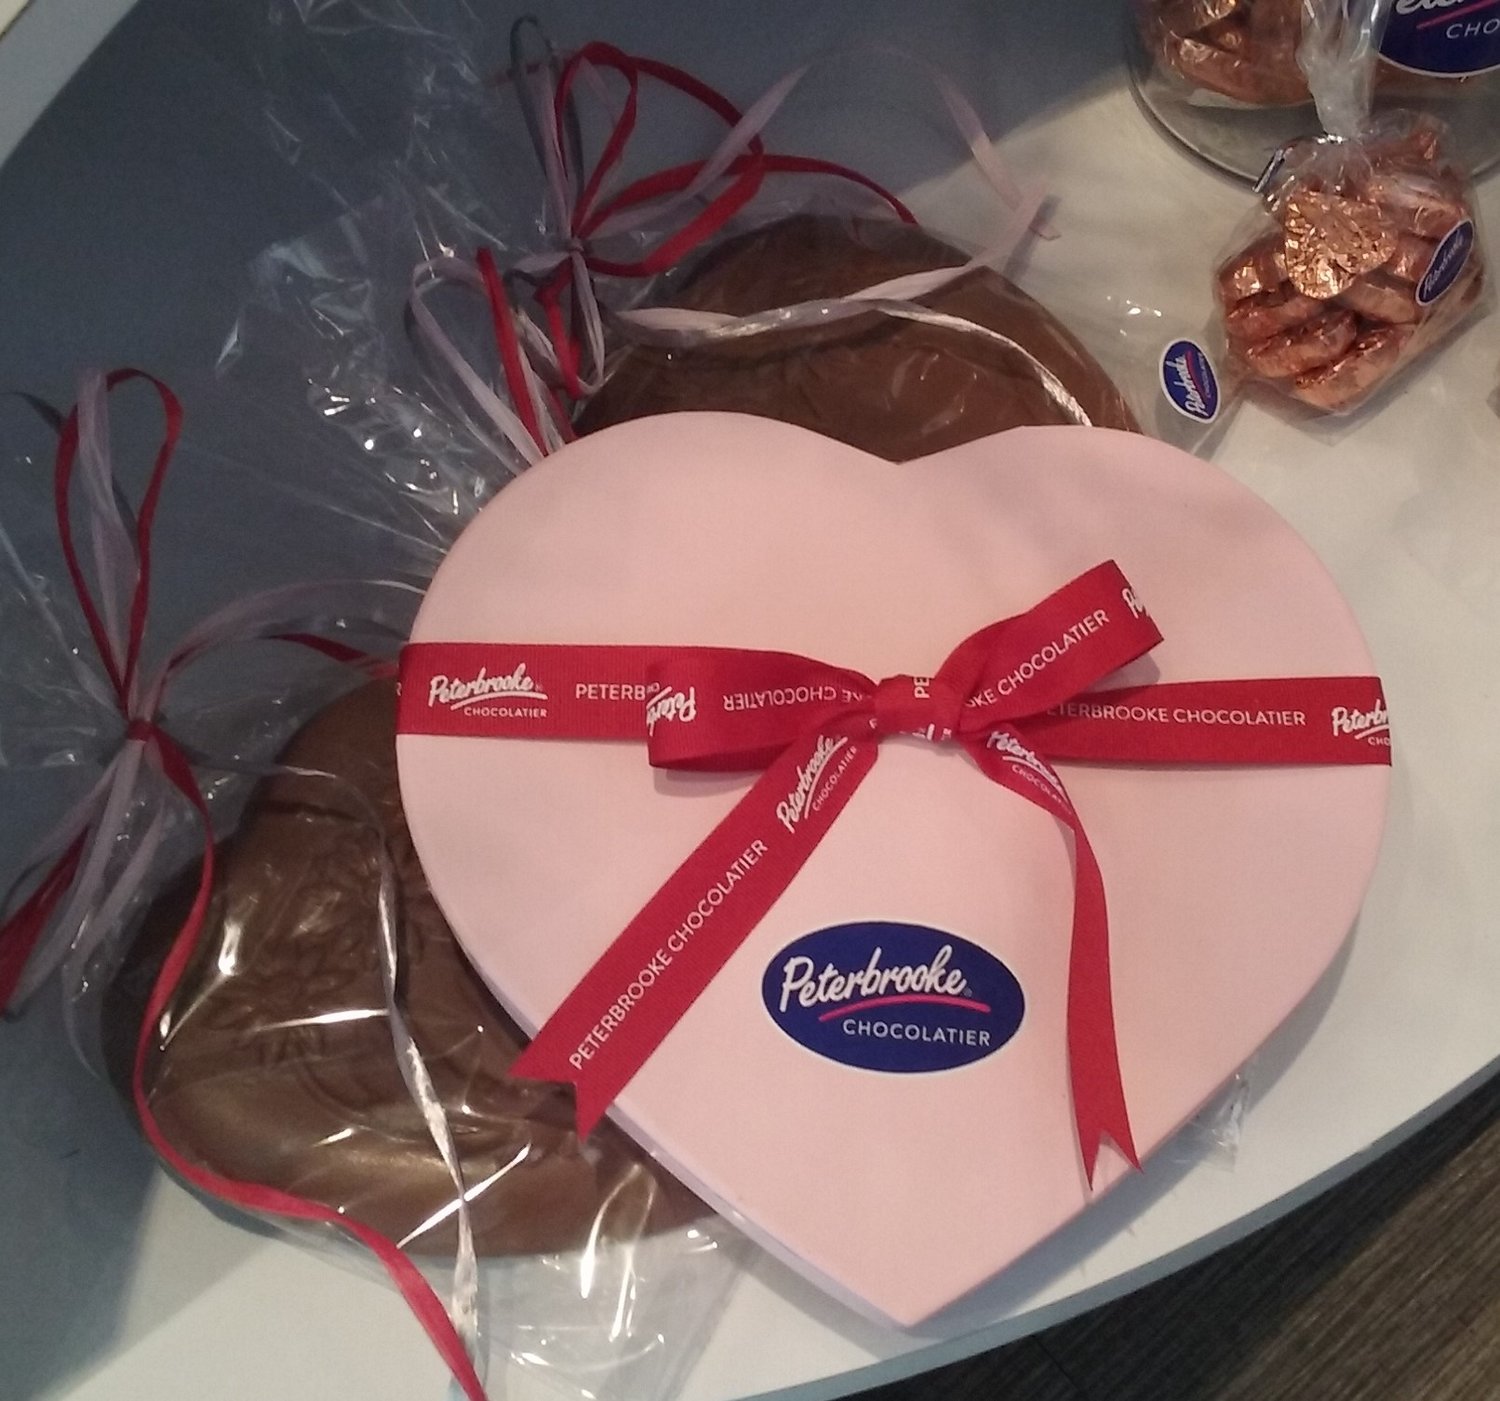 Heart-shaped boxes contain a variety of chocolate samples. This one has 22 pieces.